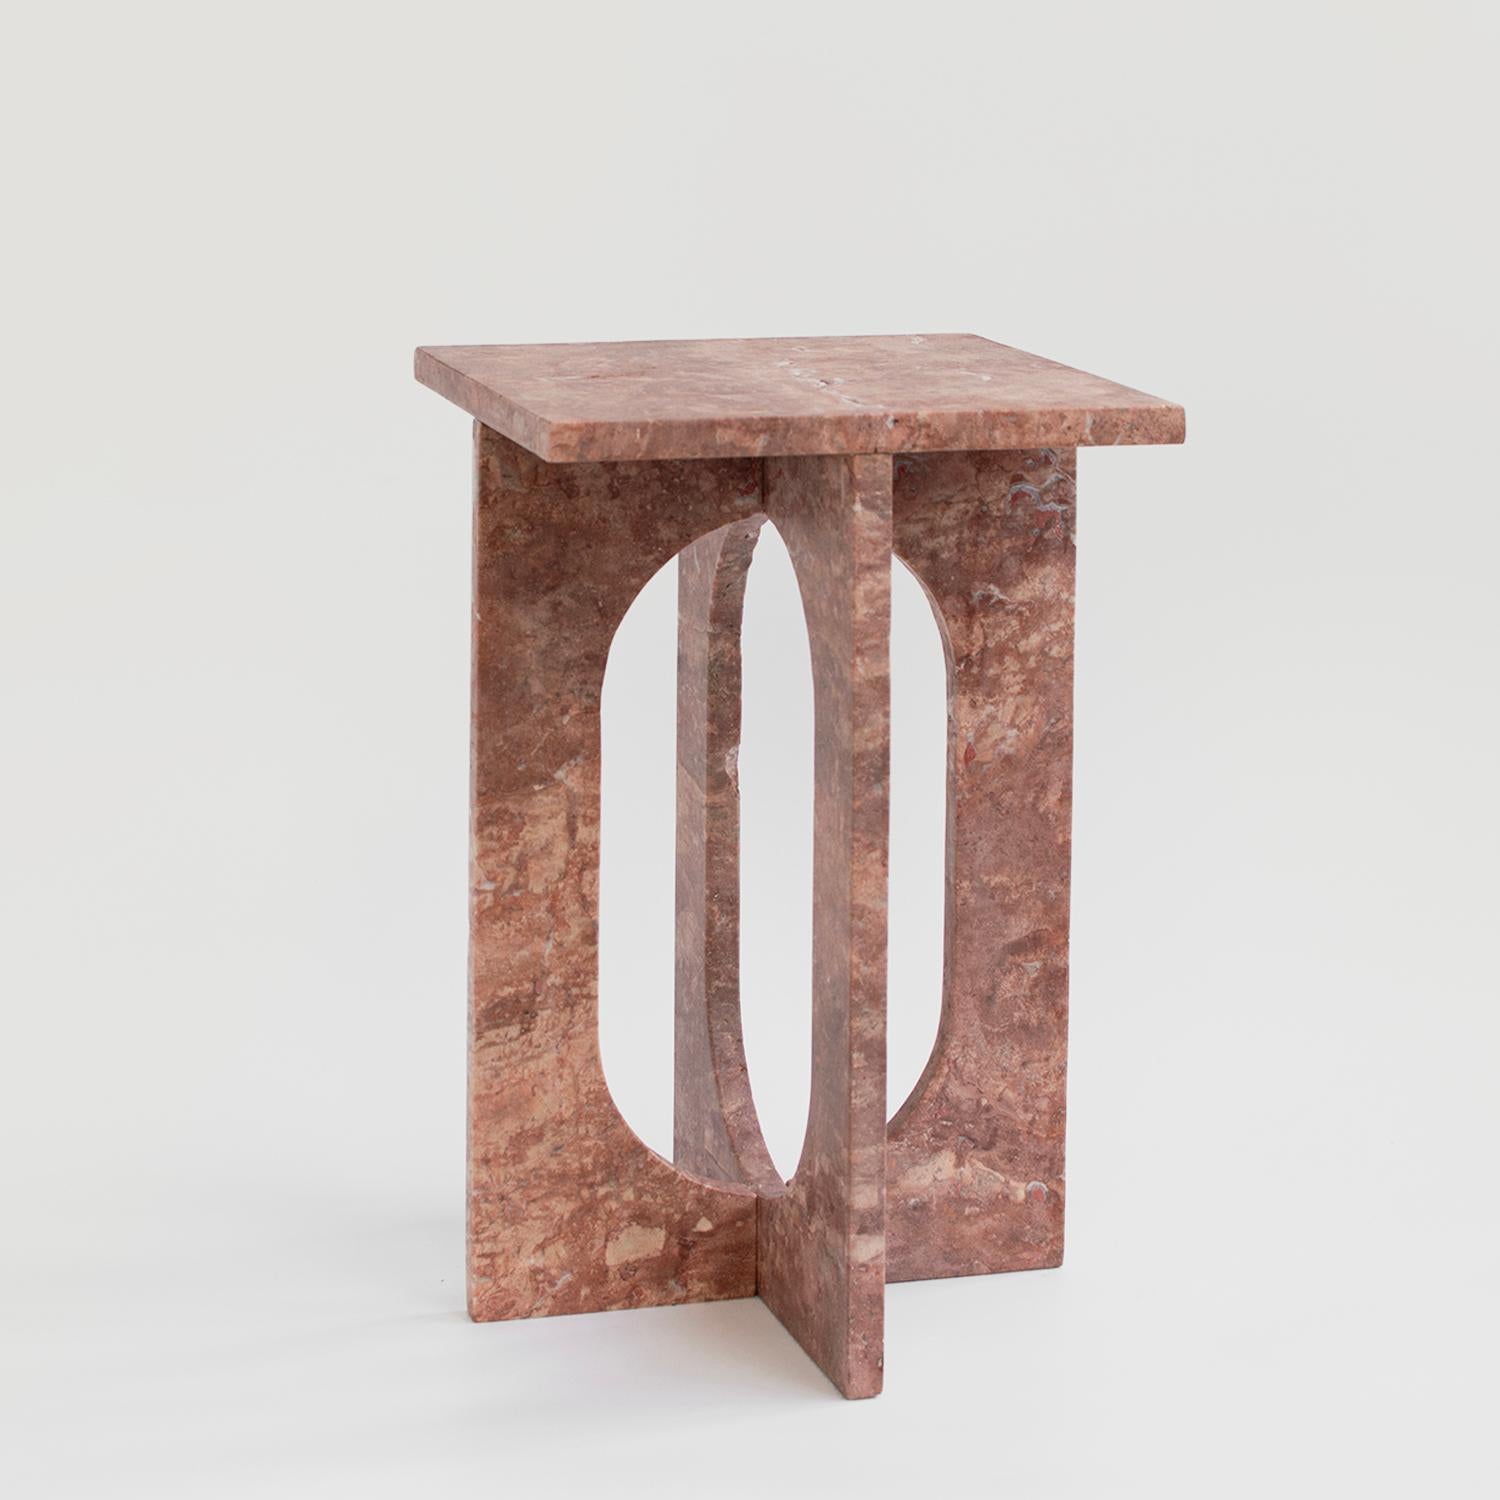 Hand-Crafted Red Travertine Side Table 'BOND